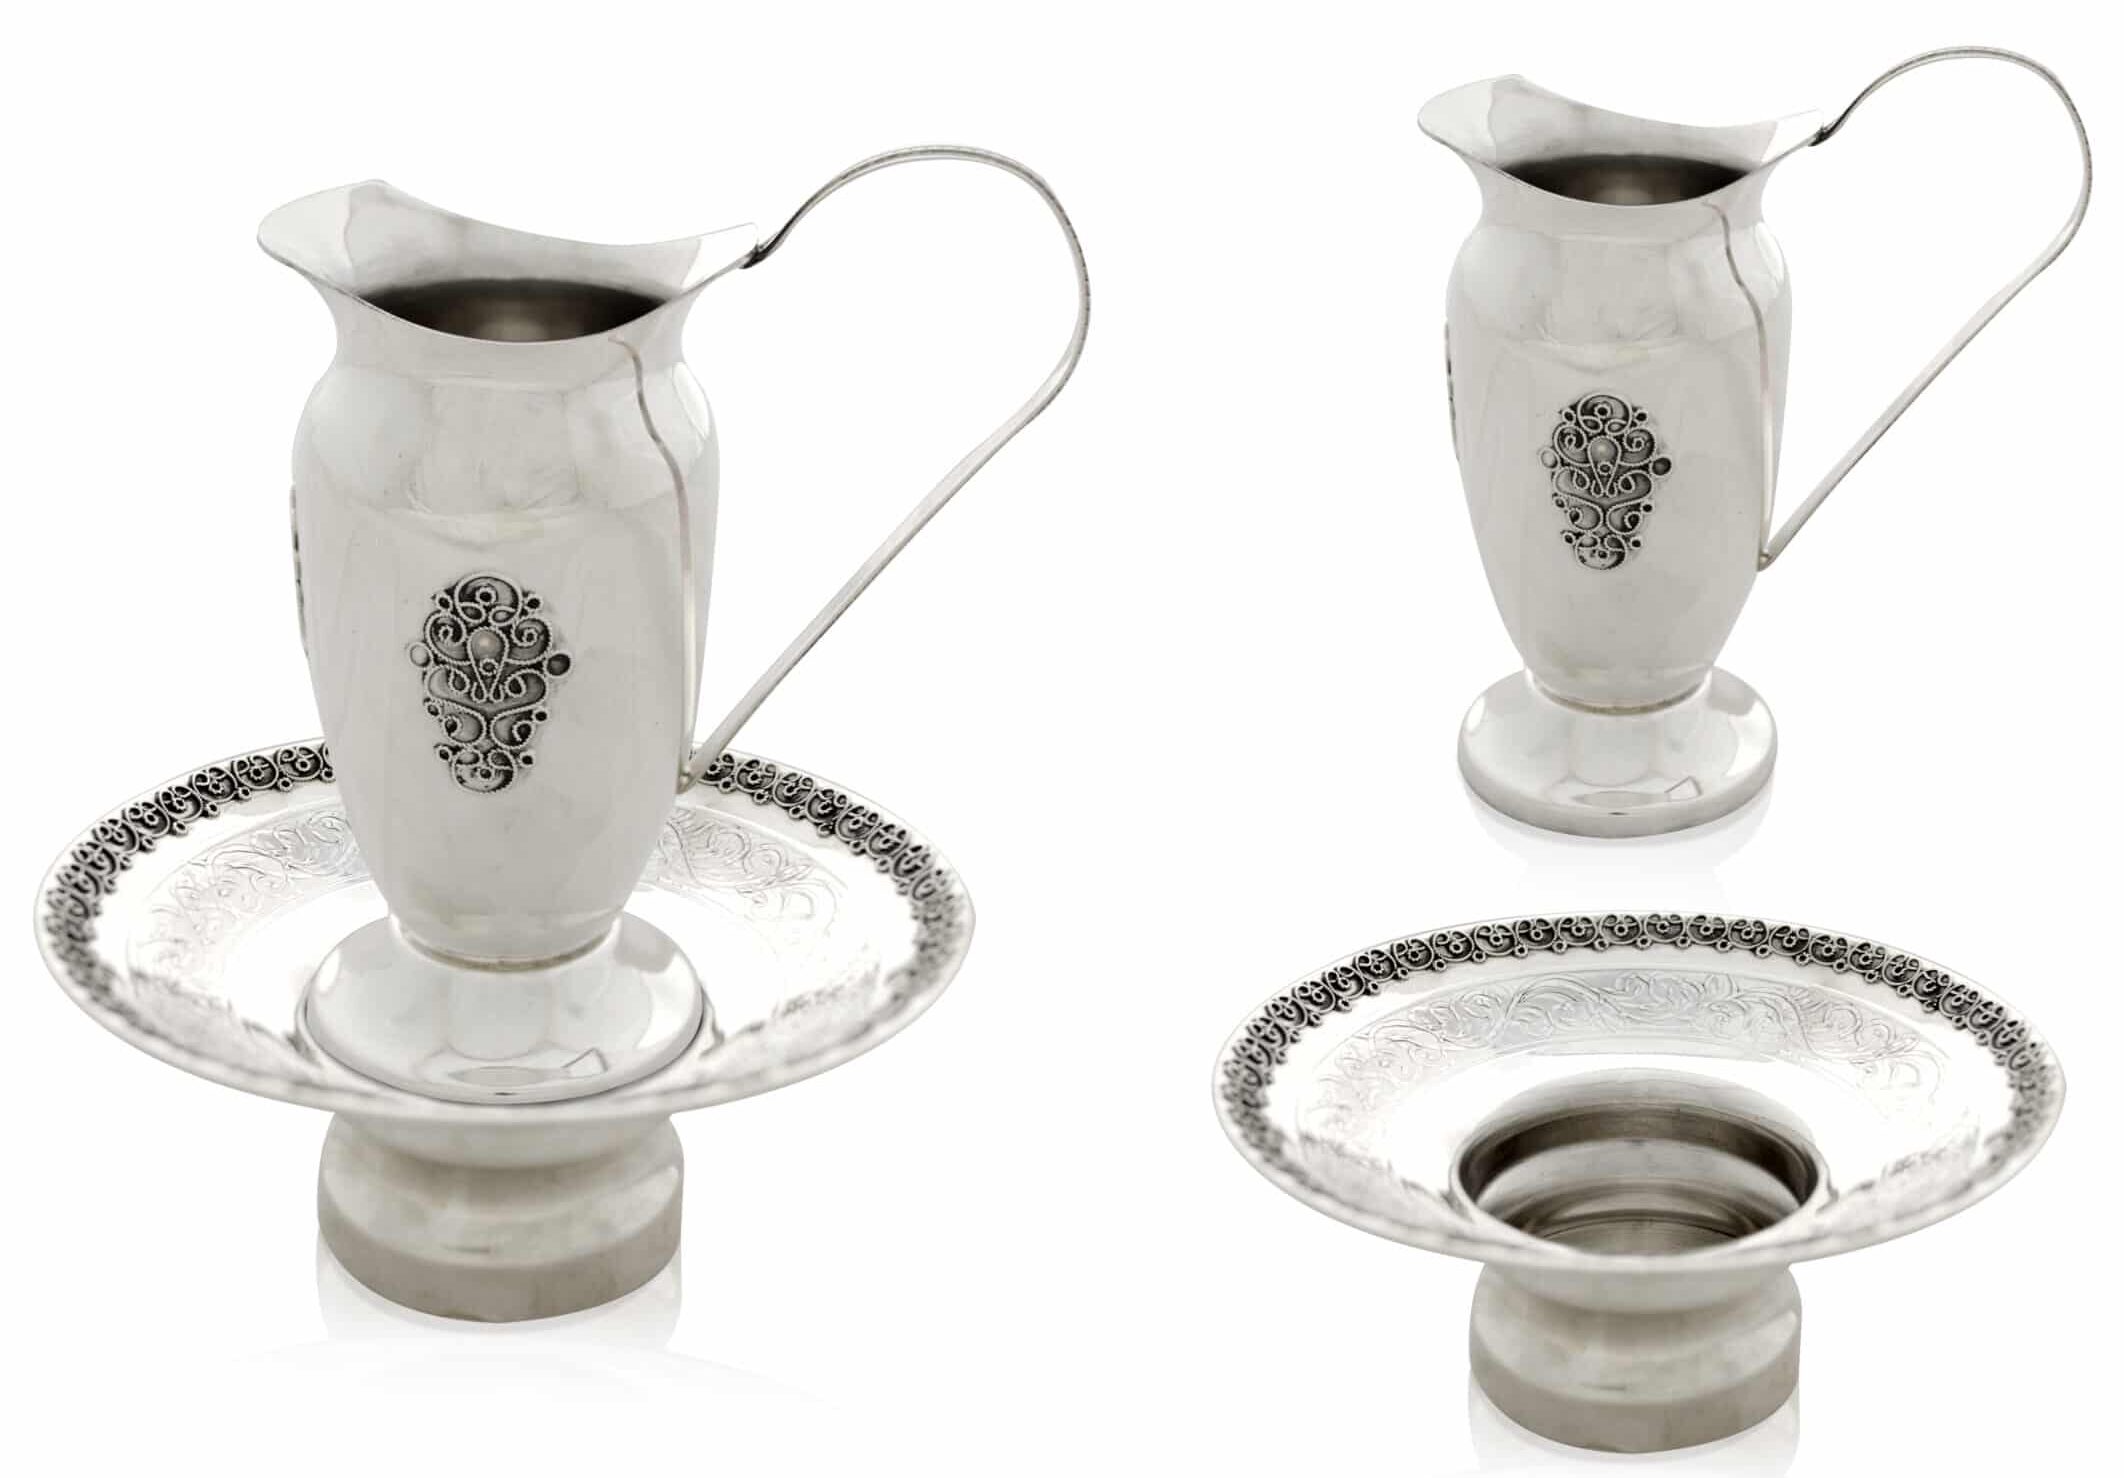 Washing Cup with Cut-Out Filigree Elements